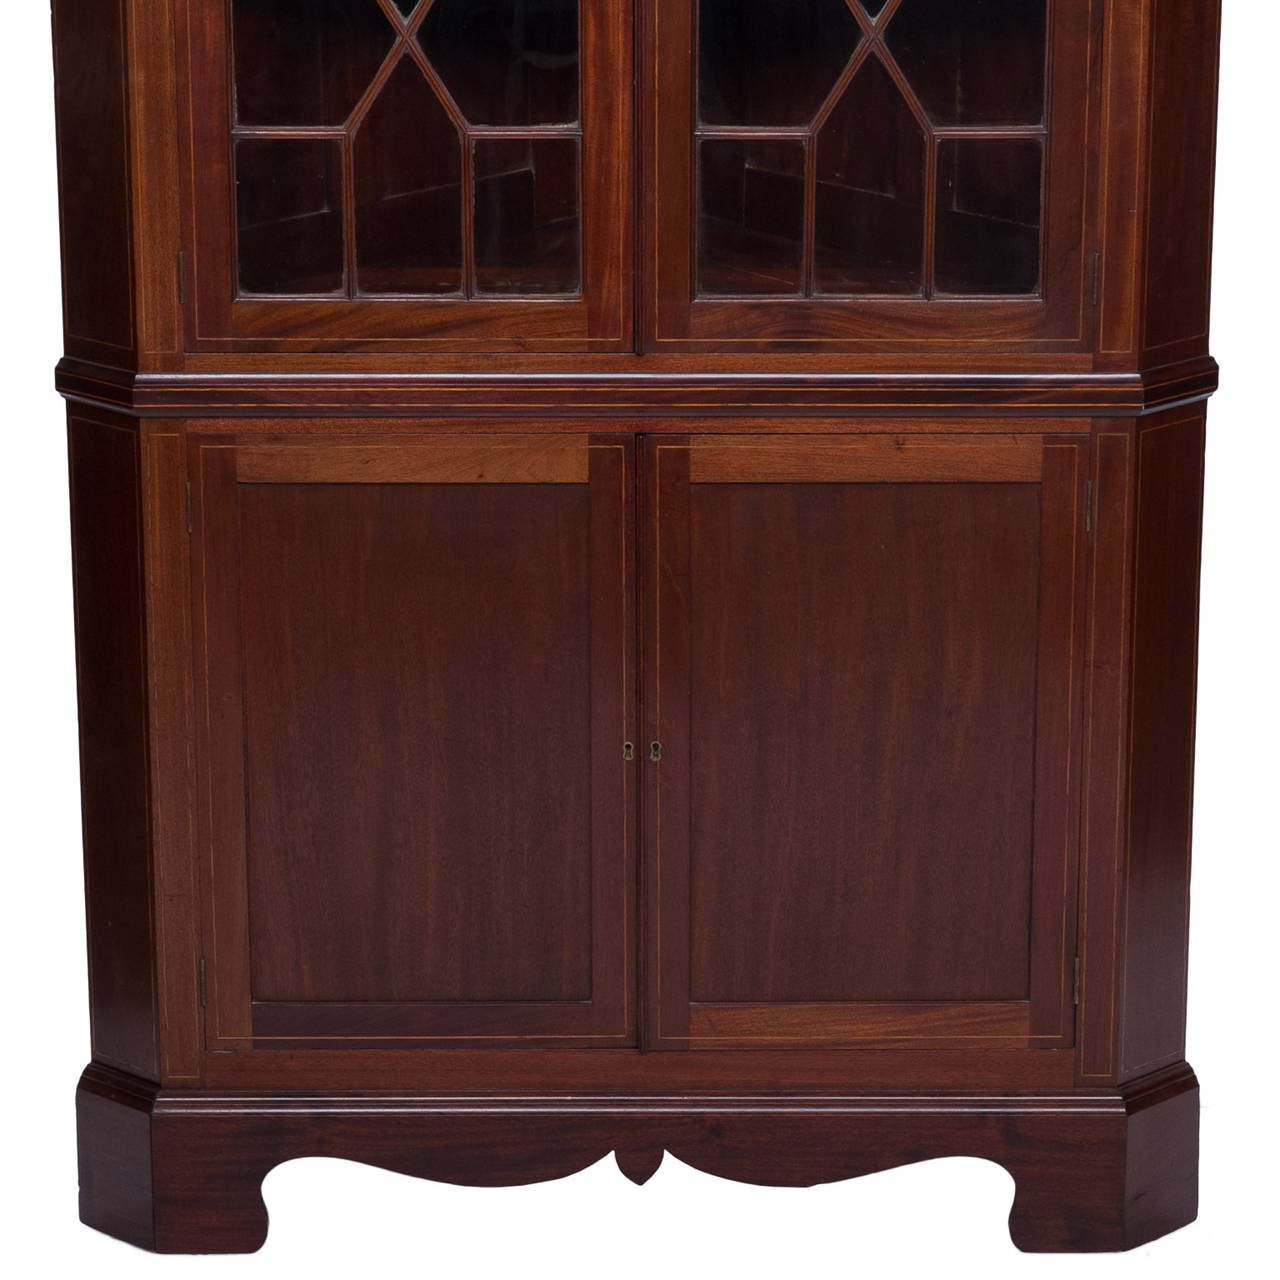 A fine late 19th century Sheraton style mahogany satinwood inlaid corner cabinet with a broken arch pediment. Two doors on the top with mullion and glass front revealing two shelves. Two doors at the bottom which are framed and has a recessed panel